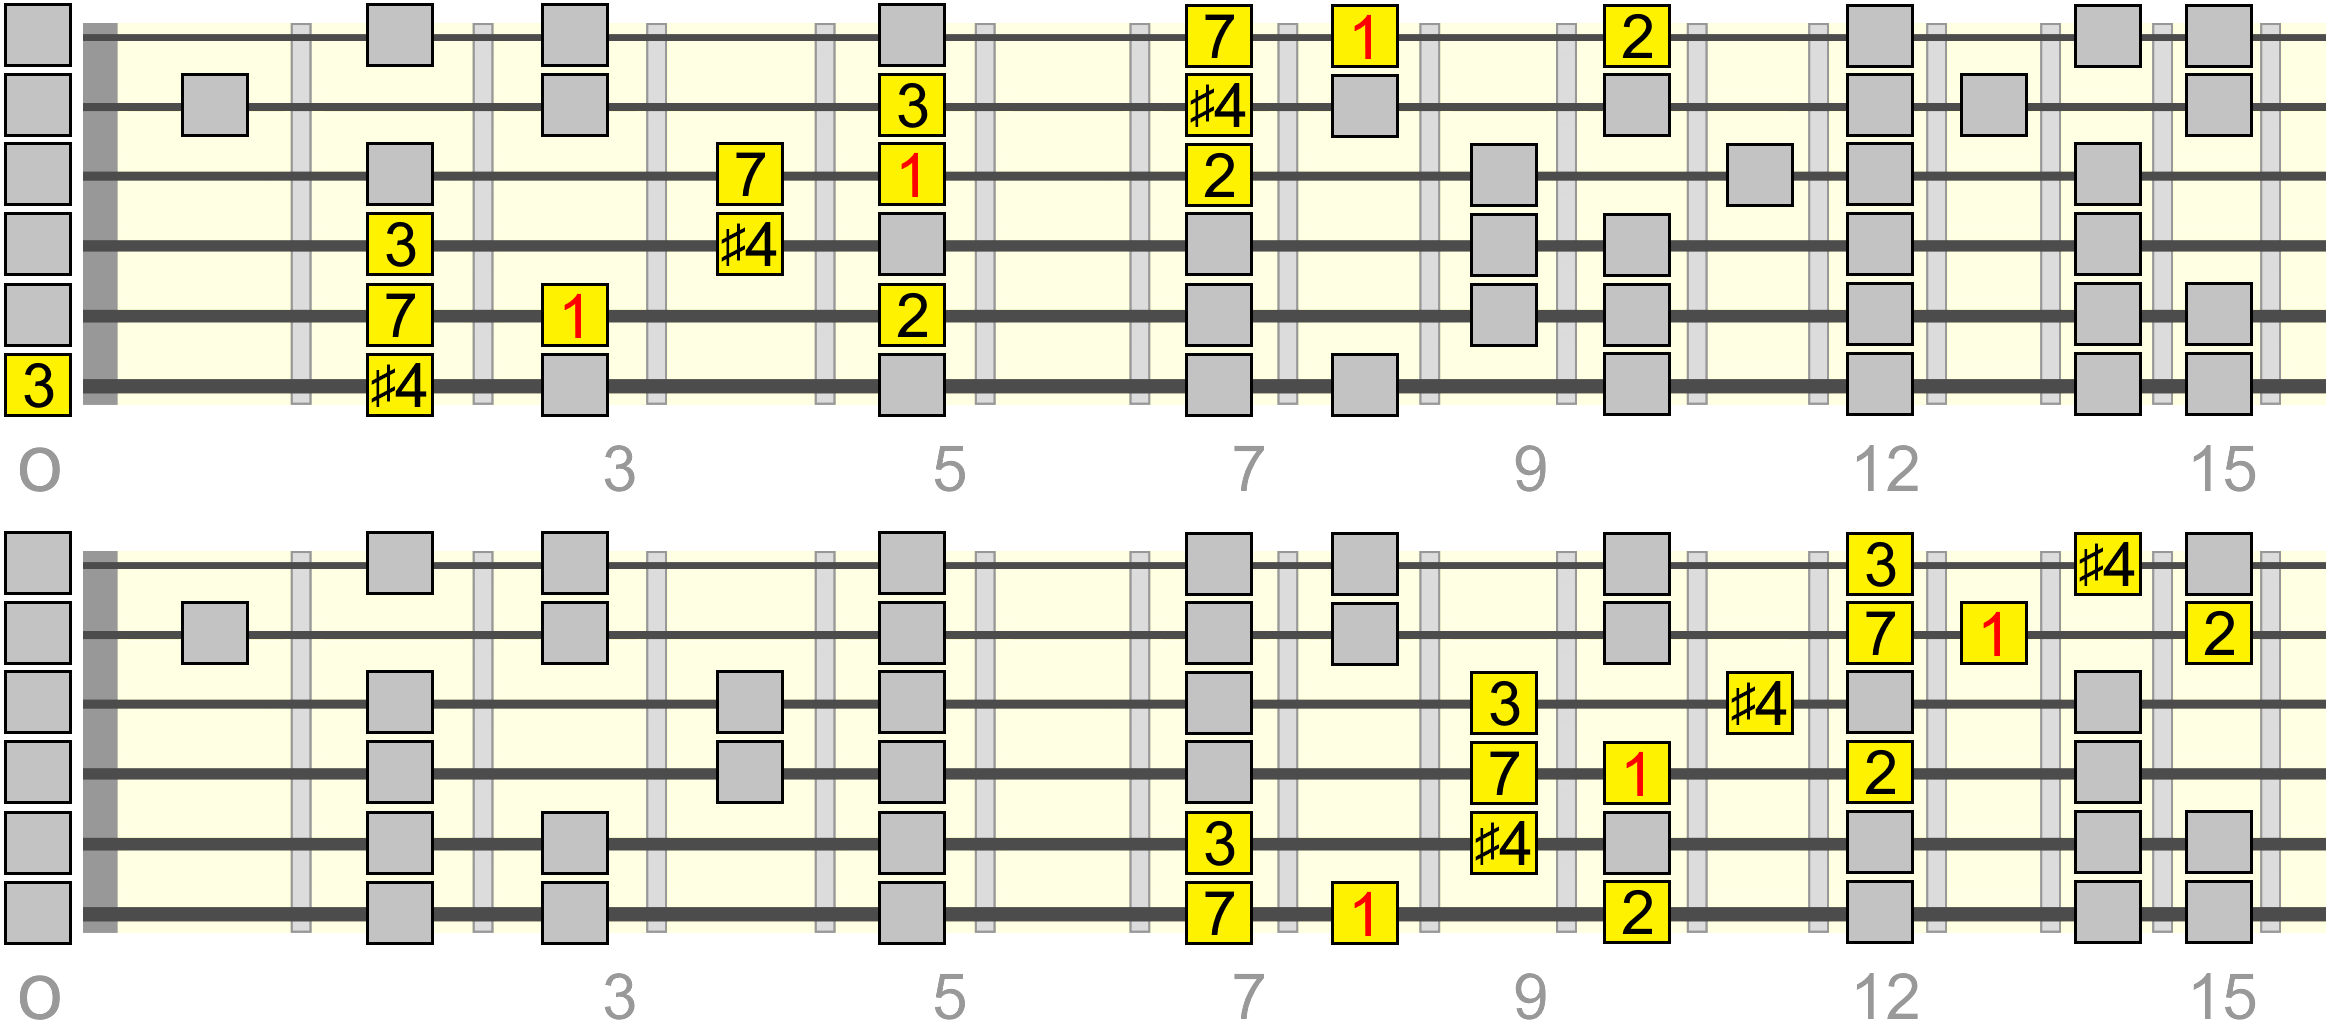 Shared post - 214  The Pentatonic Scales